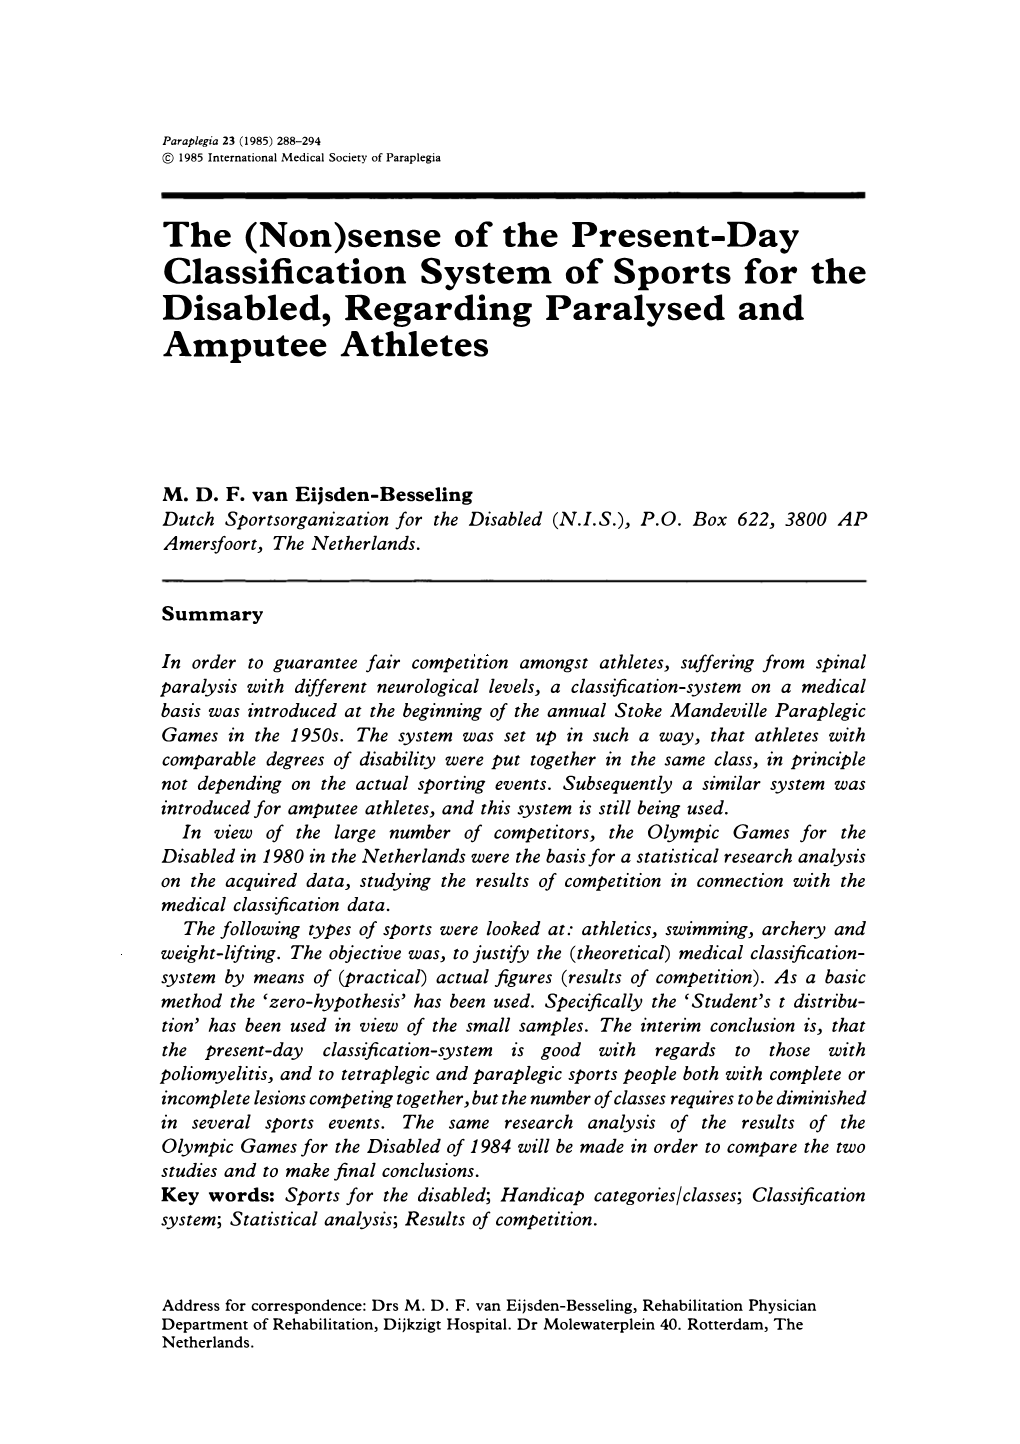 The (Non)Sense of the Present-Day Classification System of Sports for the Disabled, Regarding Paralysed and Amputee Athletes